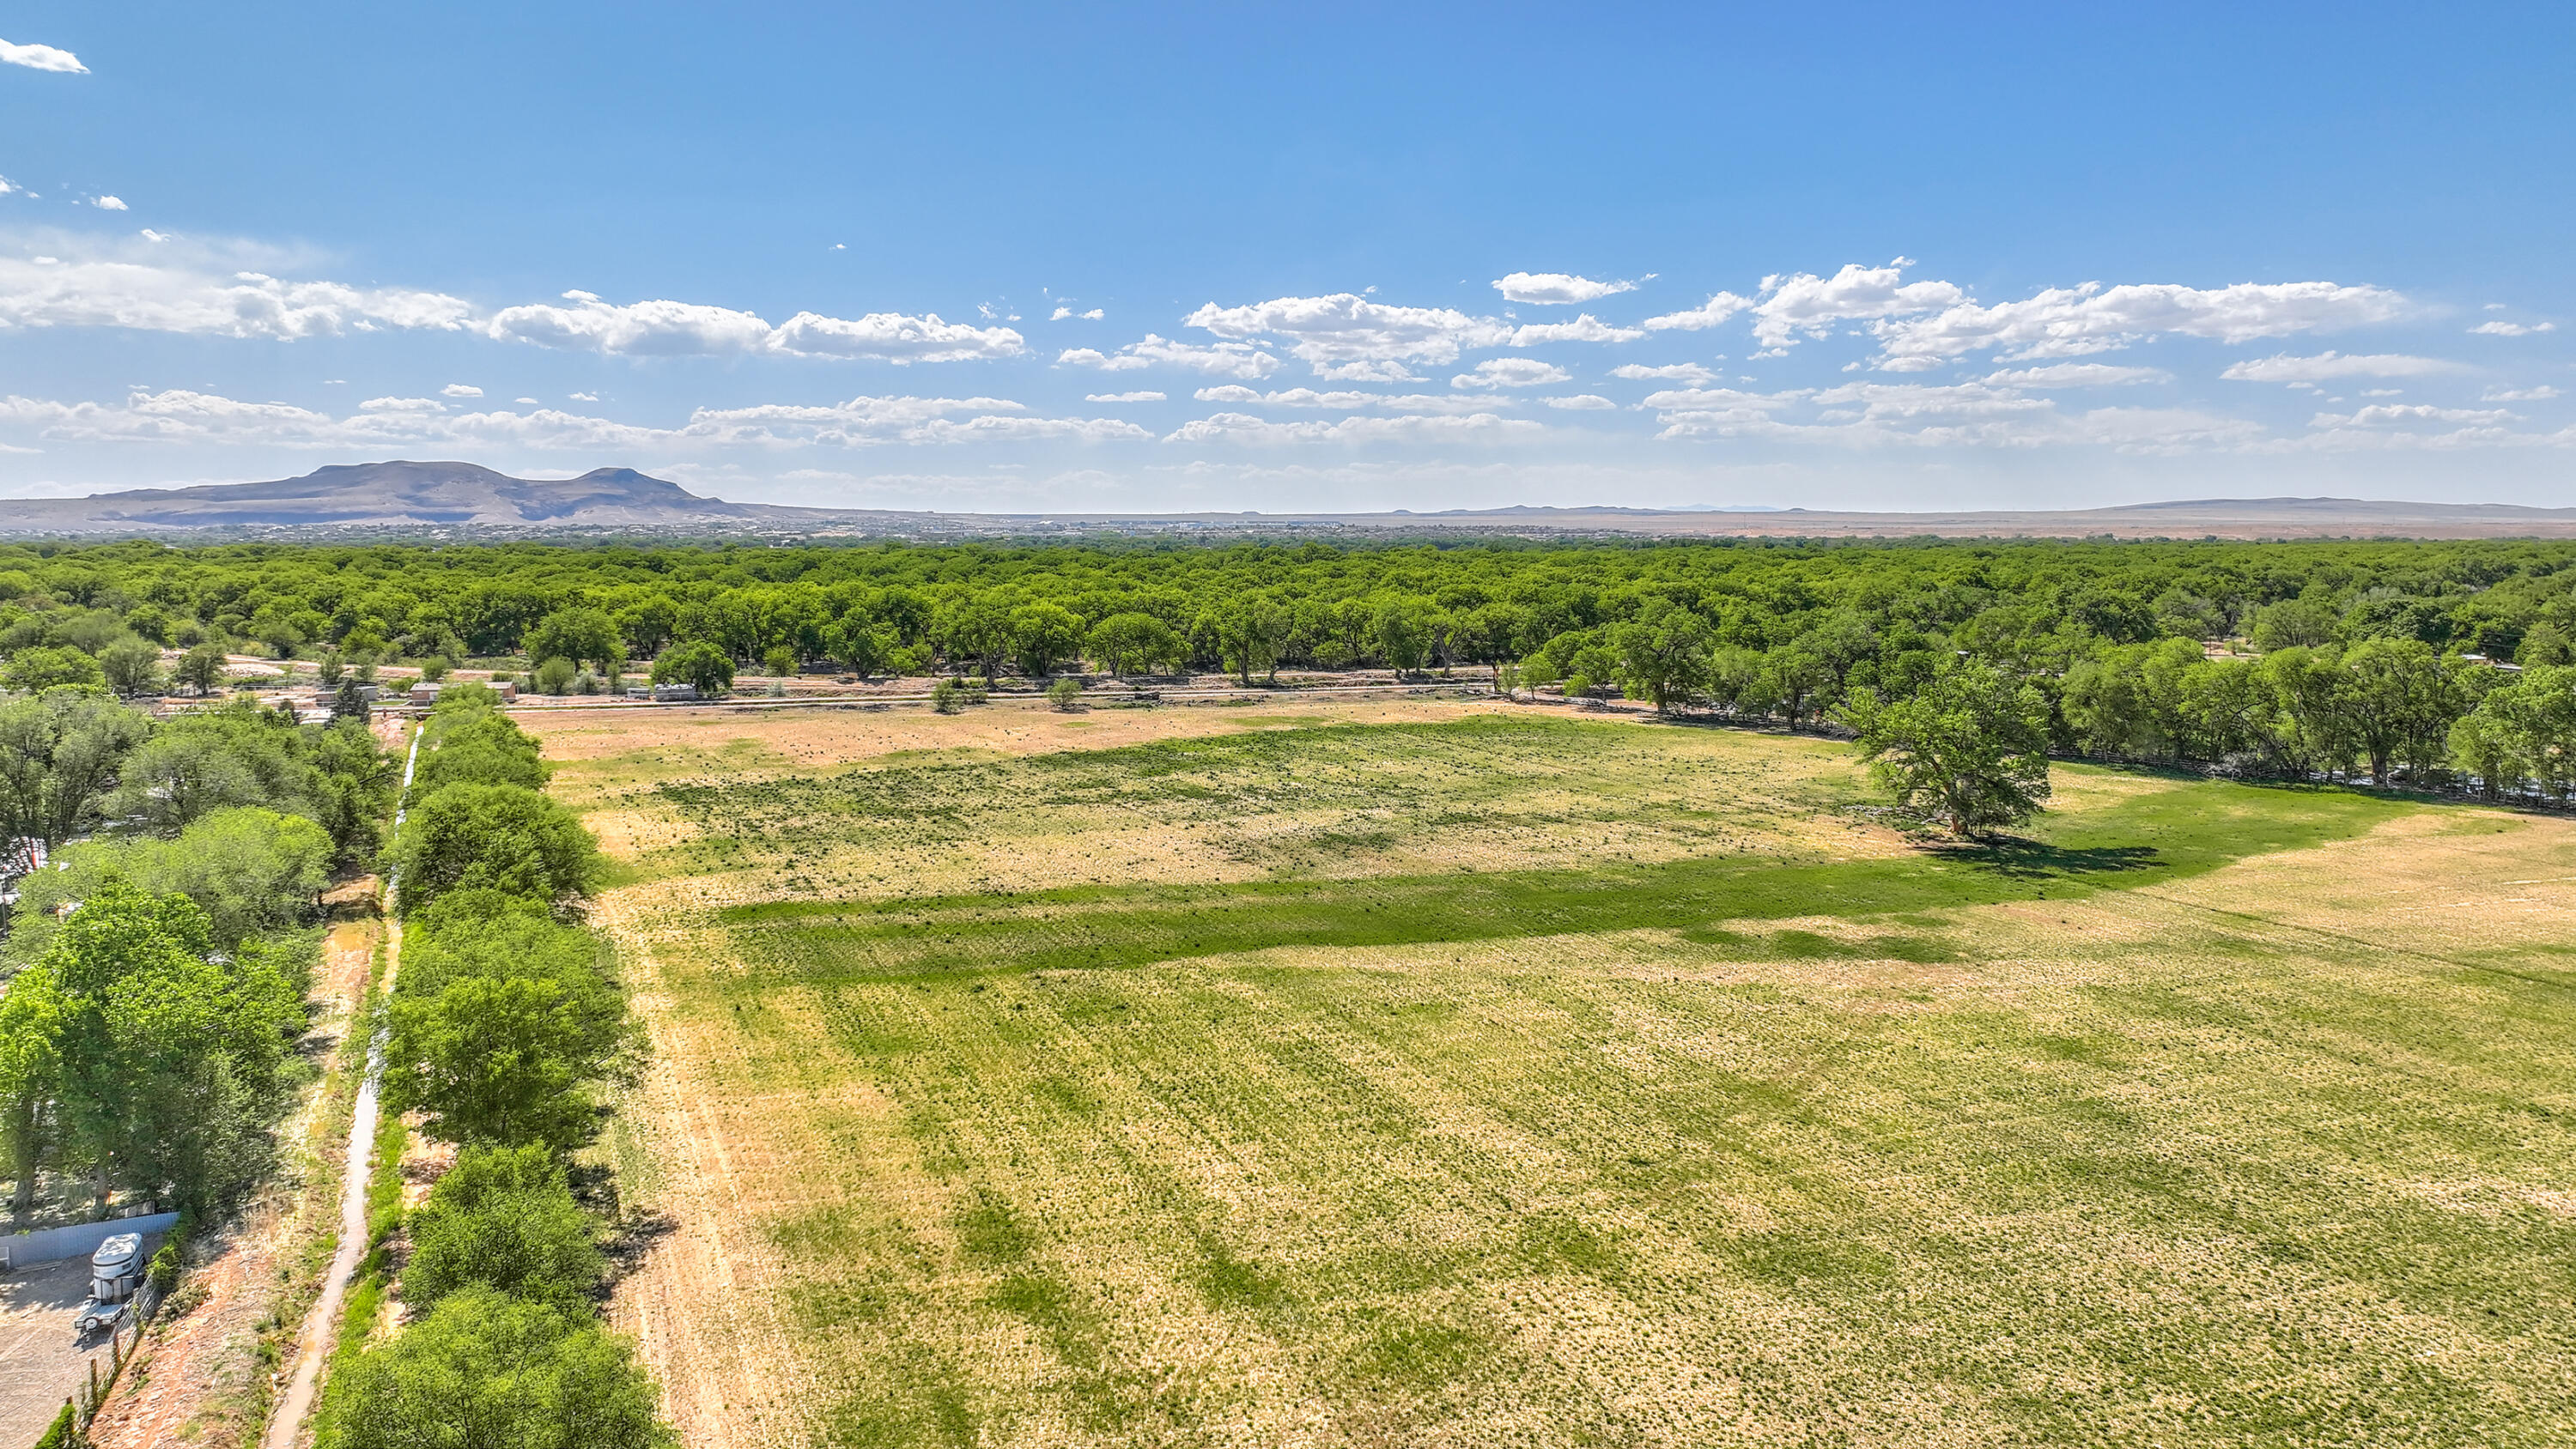 Rallier, Peralta, New Mexico 87042, ,Land,For Sale, Rallier,1034447